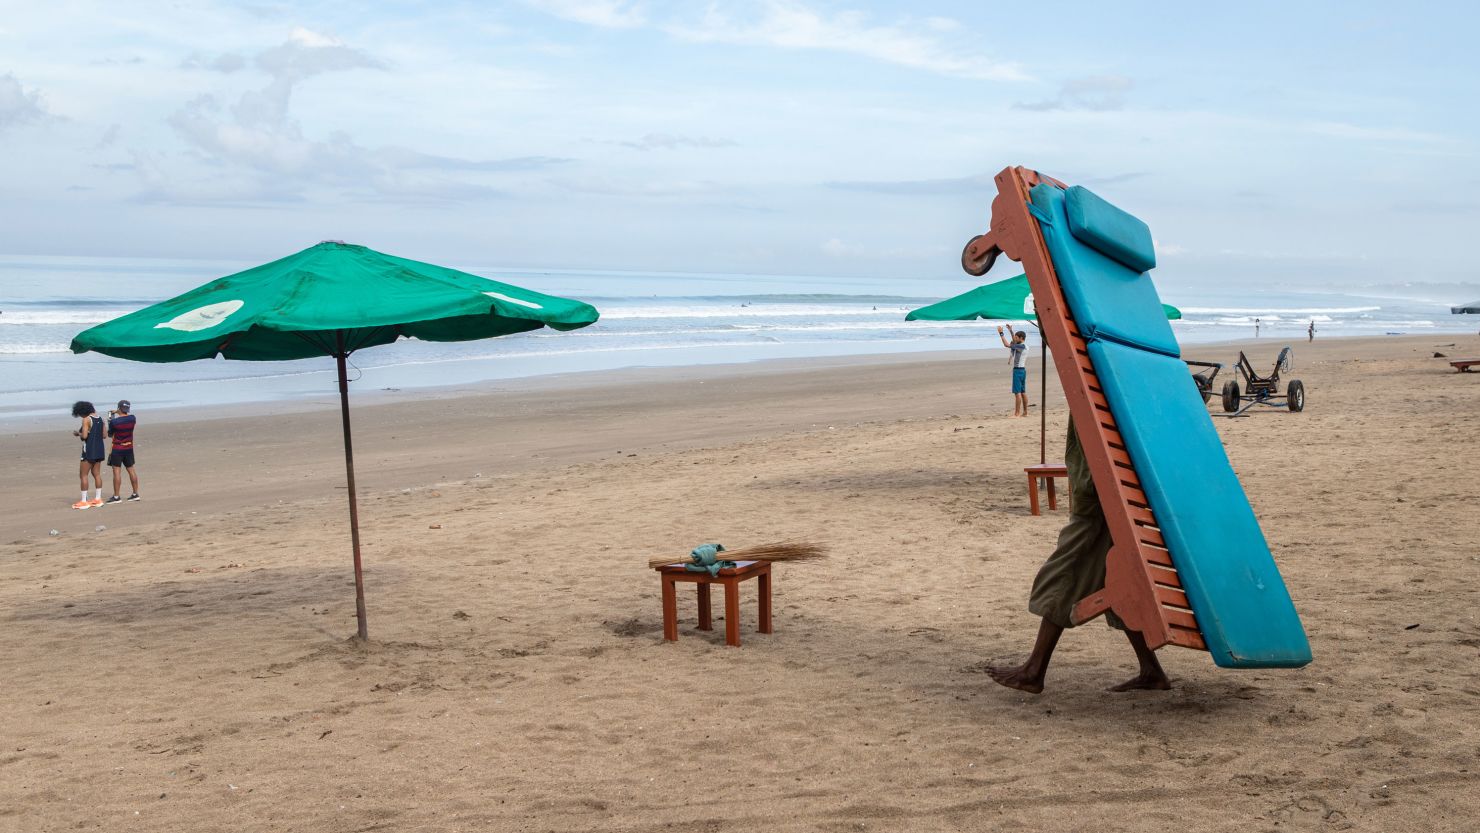 A man carries a lounge chair at the beach in the Kuta area of Bali, Indonesia, on Friday, Oct. 29, 2021. Indonesias President Joko Widodo pushed for travel to reopen in Southeast Asia at the Asean Summit, saying this would help in economic recovery in the region that has seen coronavirus cases recede. Photographer: Putu Sayoga/Bloomberg via Getty Images